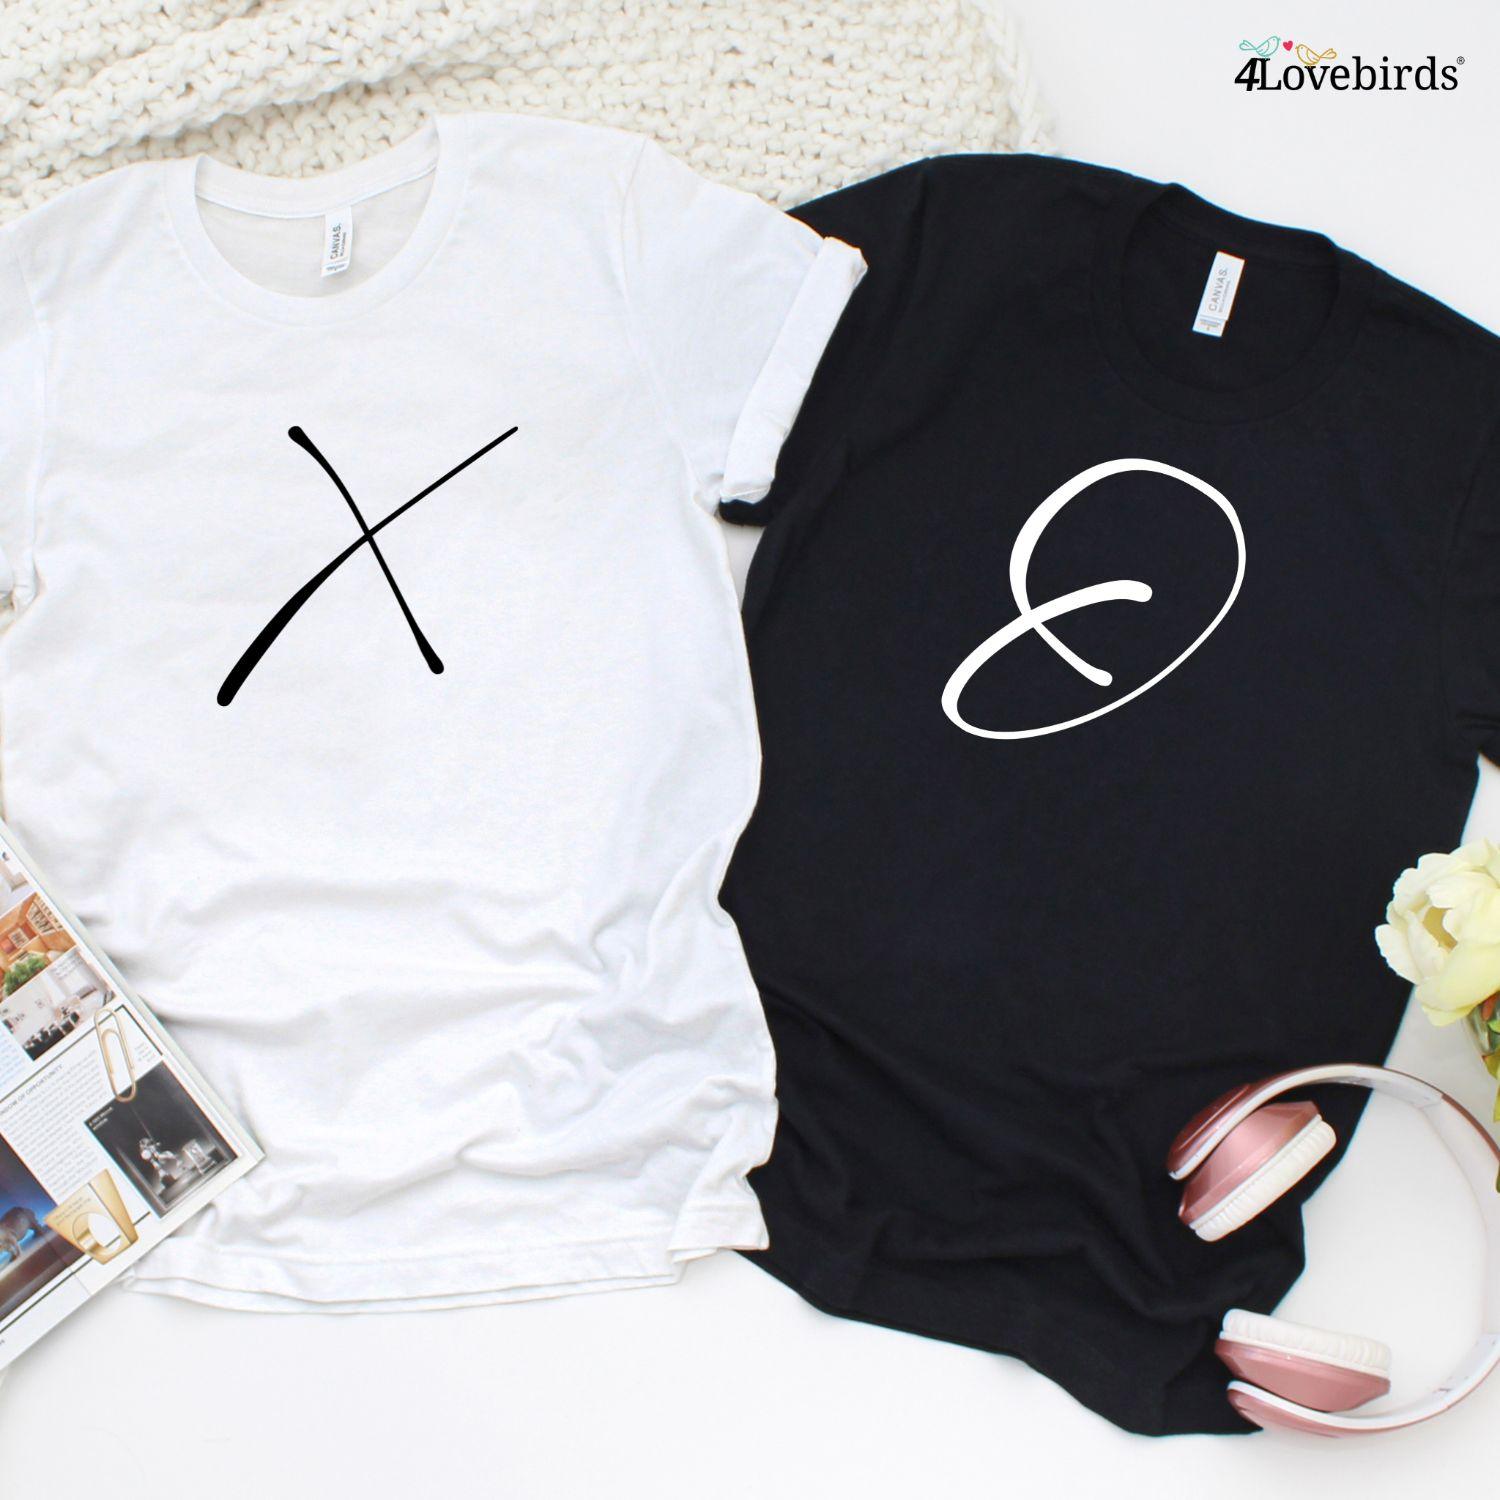 His & Hers Matching Set: X & 0 Couples Outfits, Wedding & Valentine's Gifts - 4Lovebirds